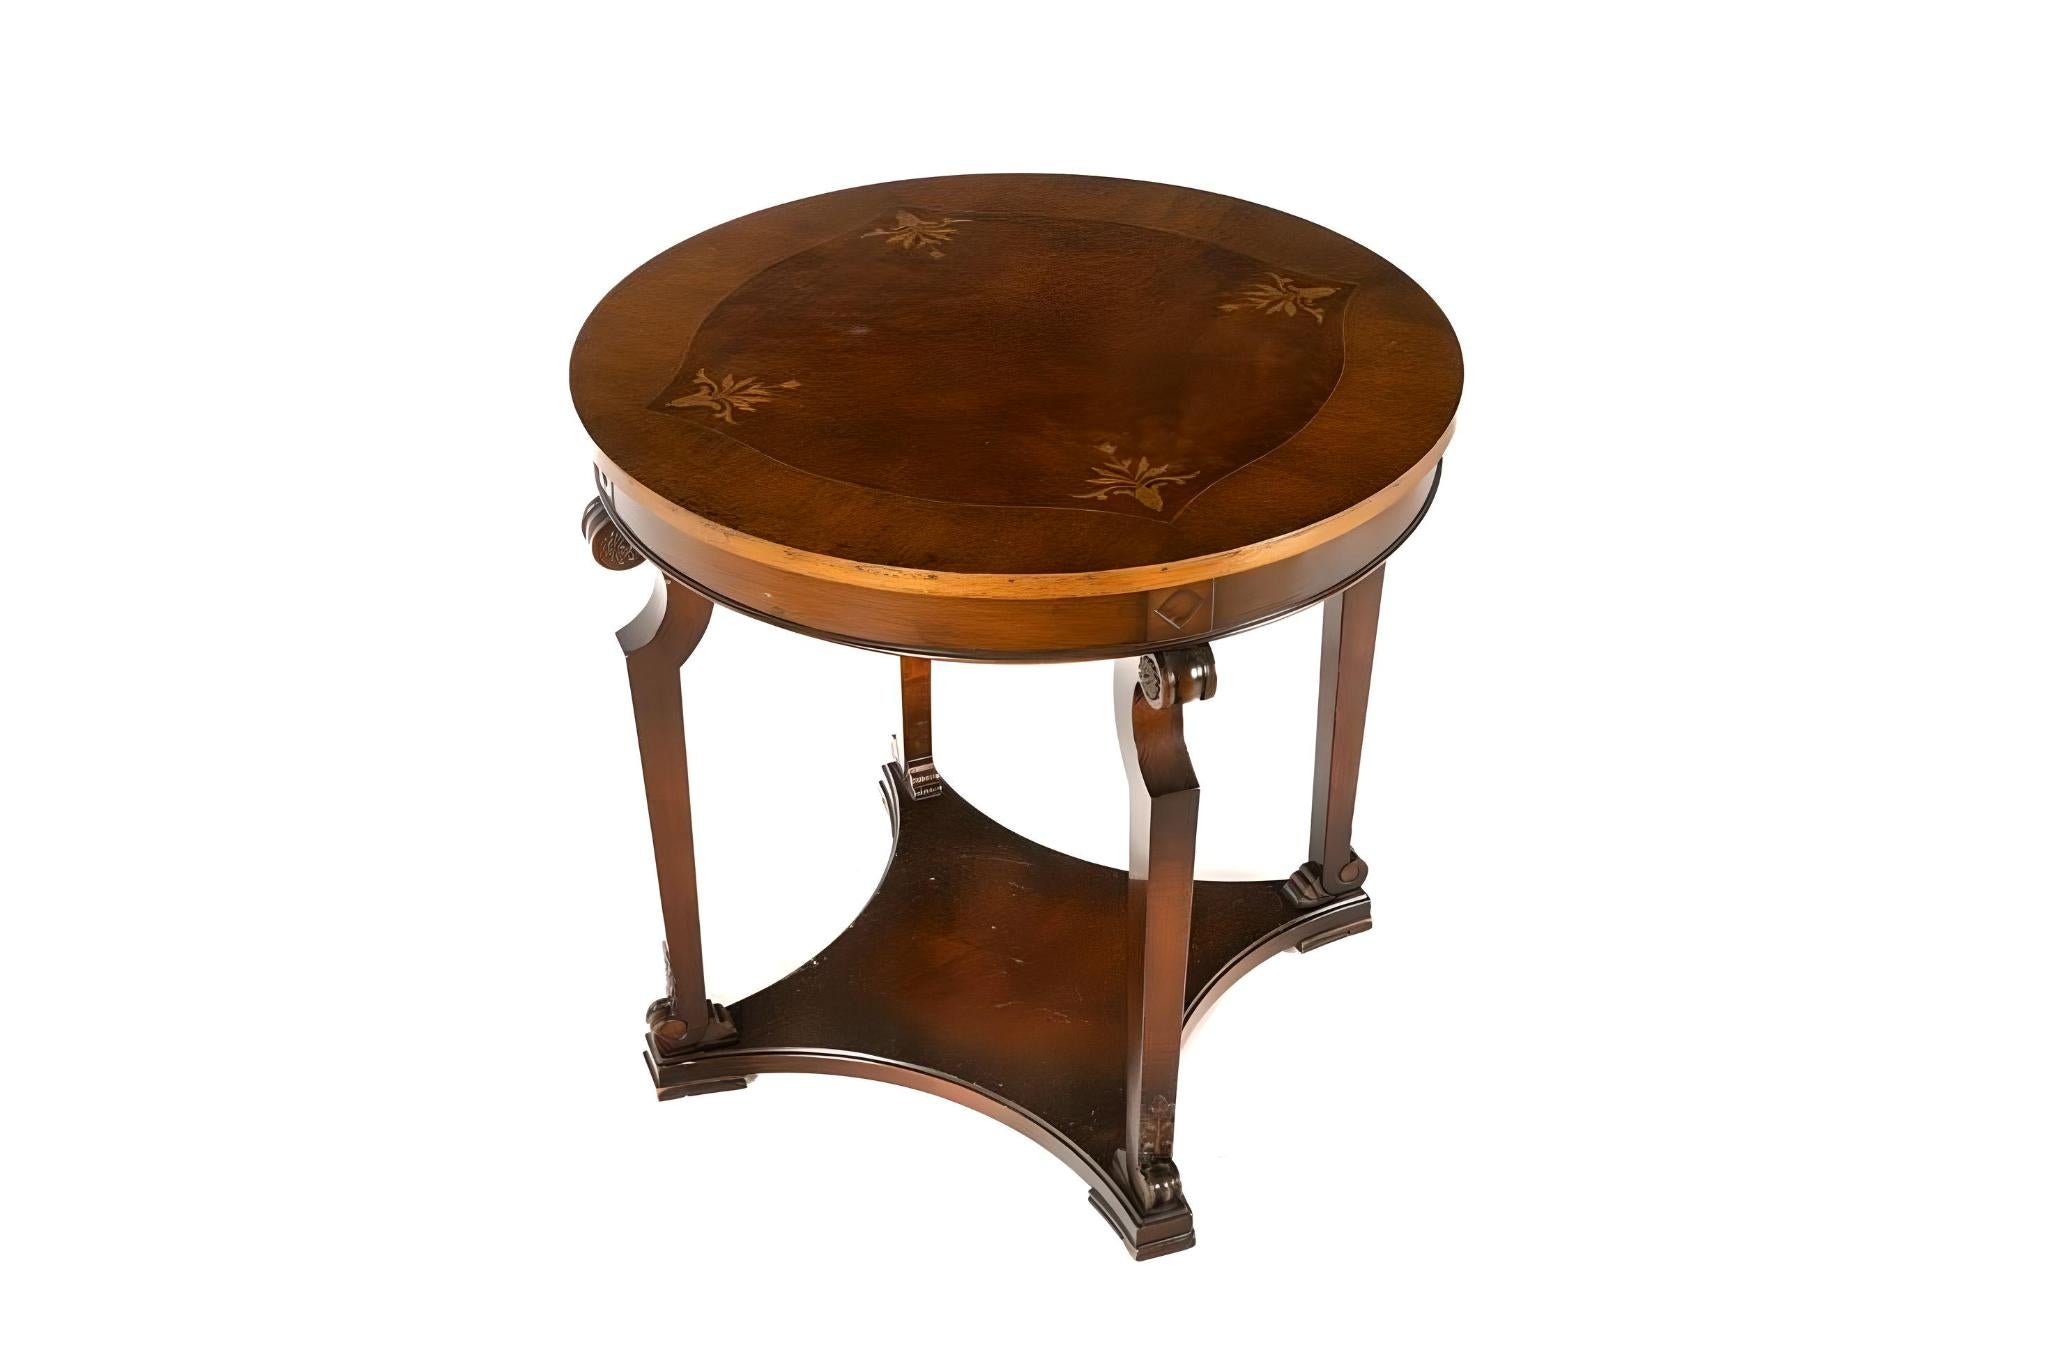 Mid-20th century, Mahogany with satin inlay with scrolling supports, vase on top not included.

Diameter: 75cm (29.5) inches
Height: 70cm (27.6) inches.